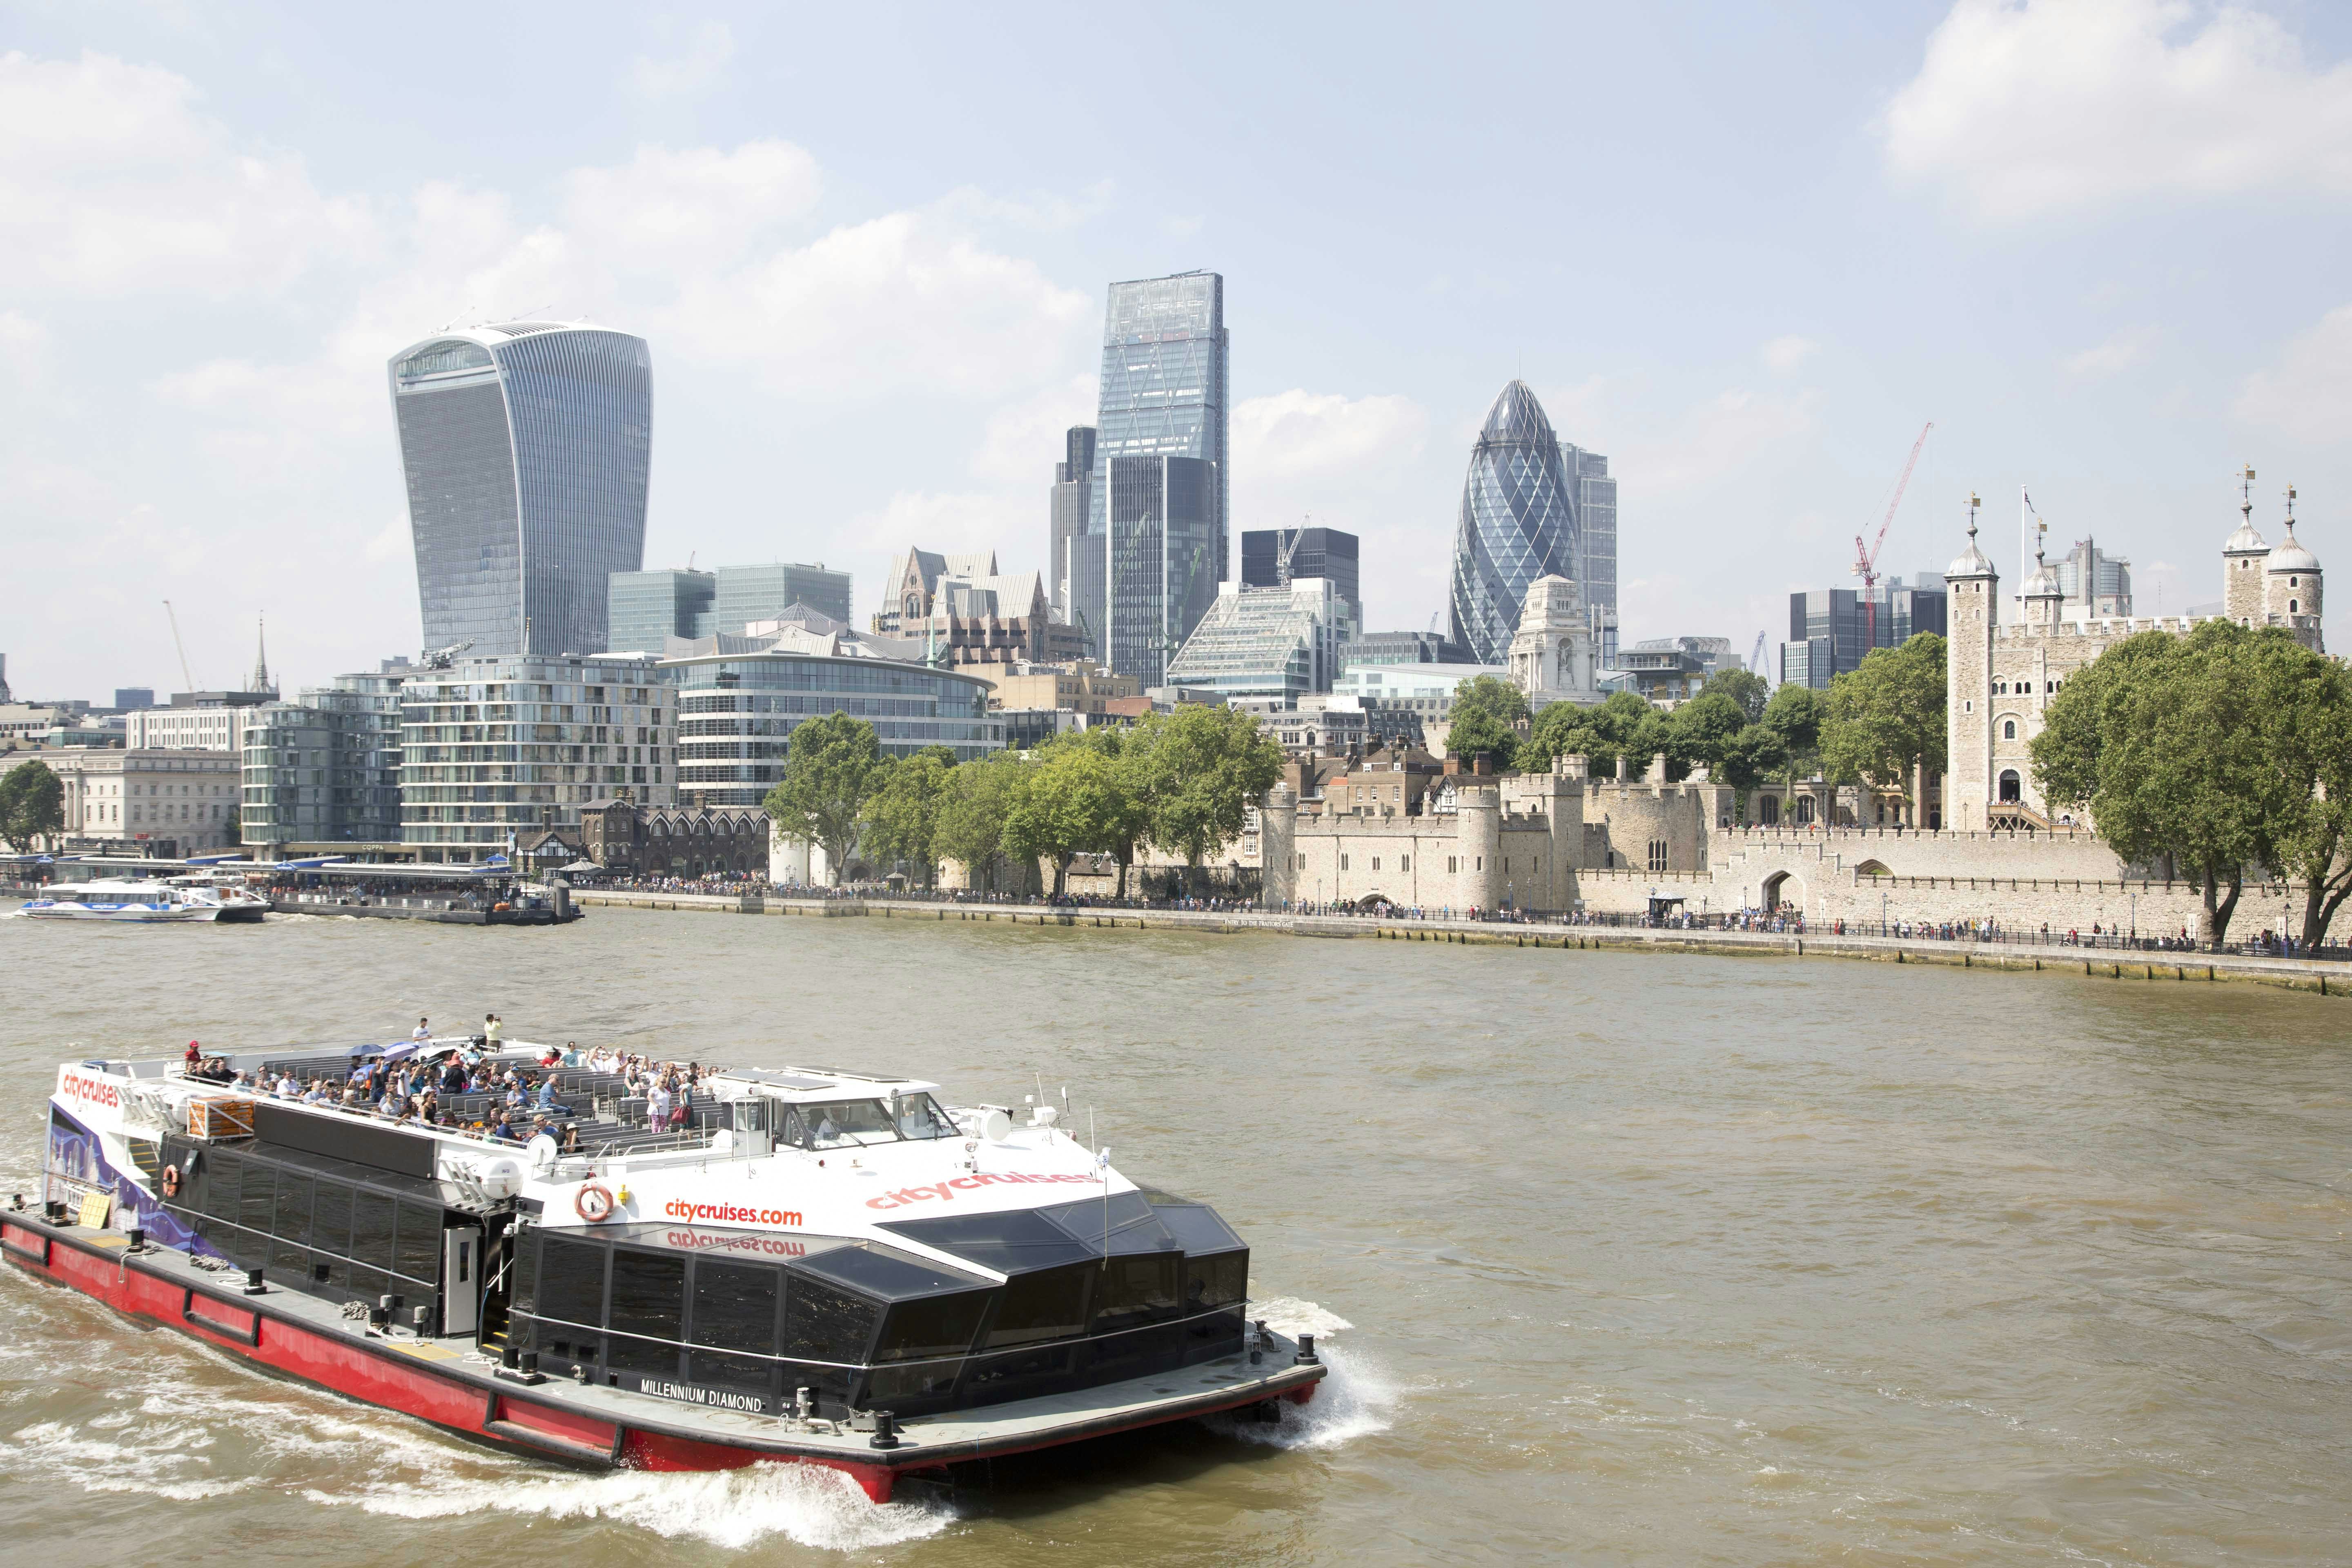 Boats Venues in London - City Cruises